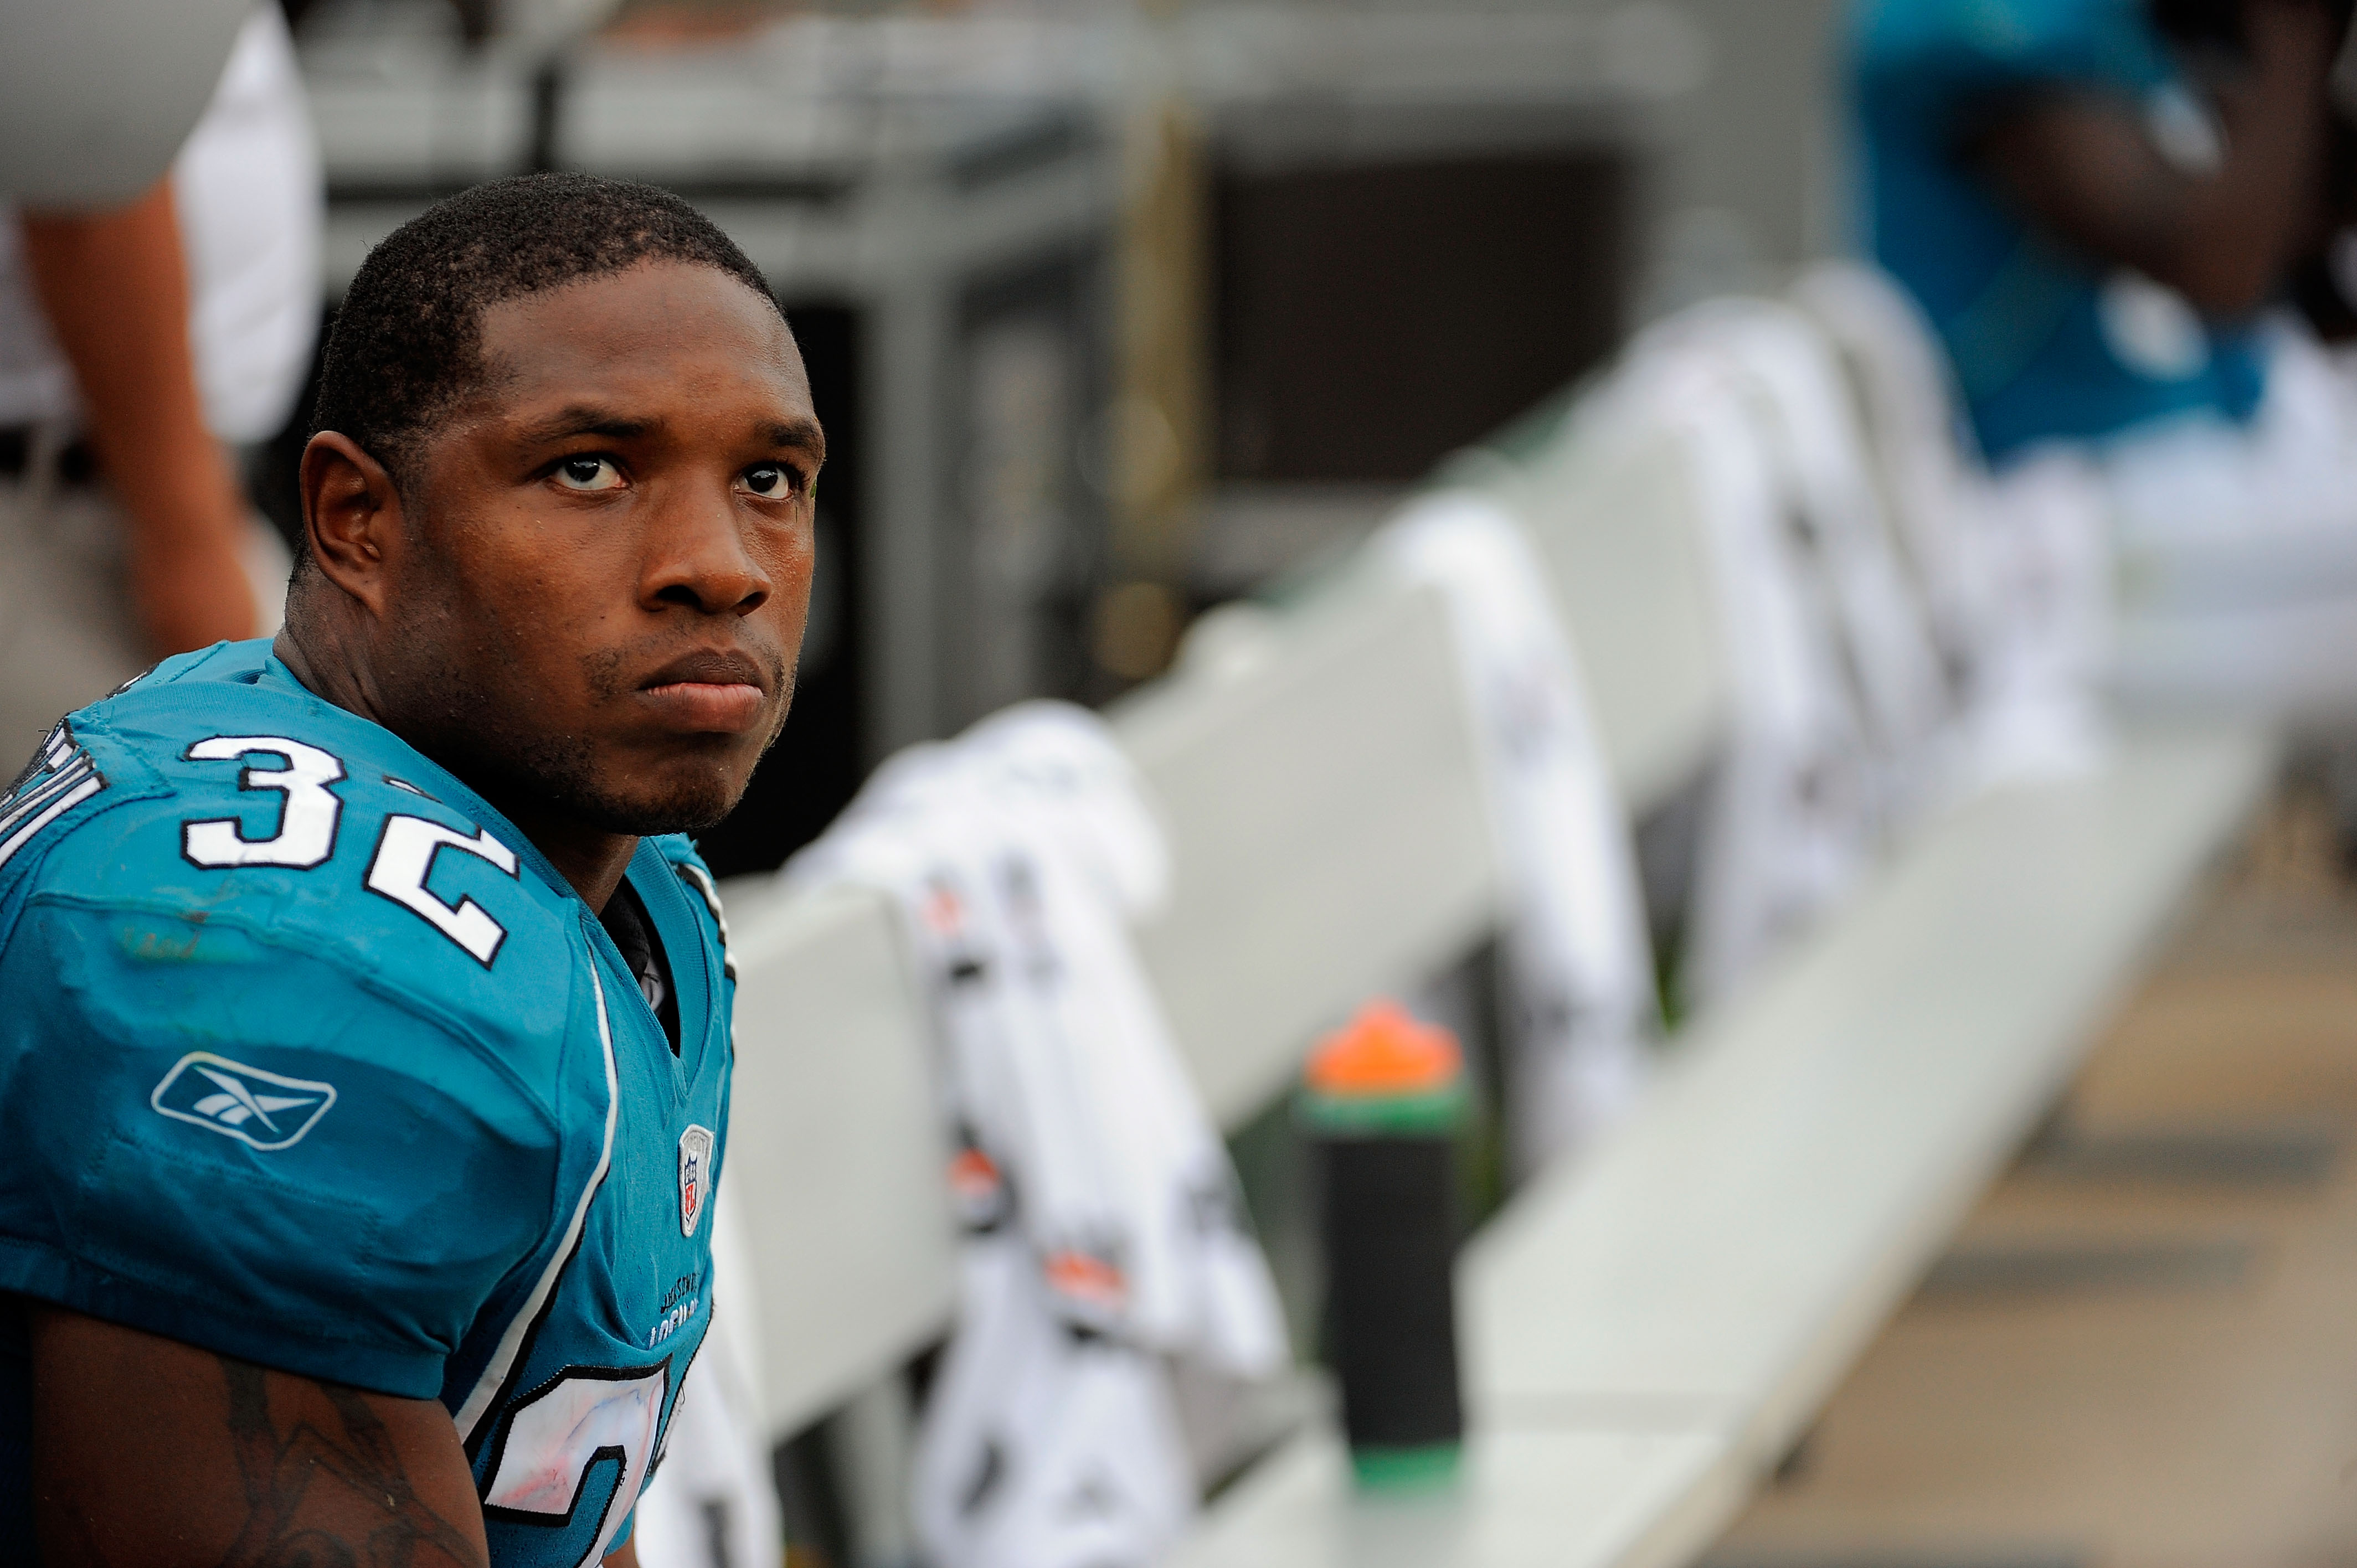 JACKSONVILLE, FL - SEPTEMBER 26:  Running back Maurice Jones-Drew #32 of the Jacksonville Jaguars sits on the sidelines watching his team take on the Philadelphia Eagles at EverBank Field on September 26, 2010 in Jacksonville, Florida. The Eagles defeated